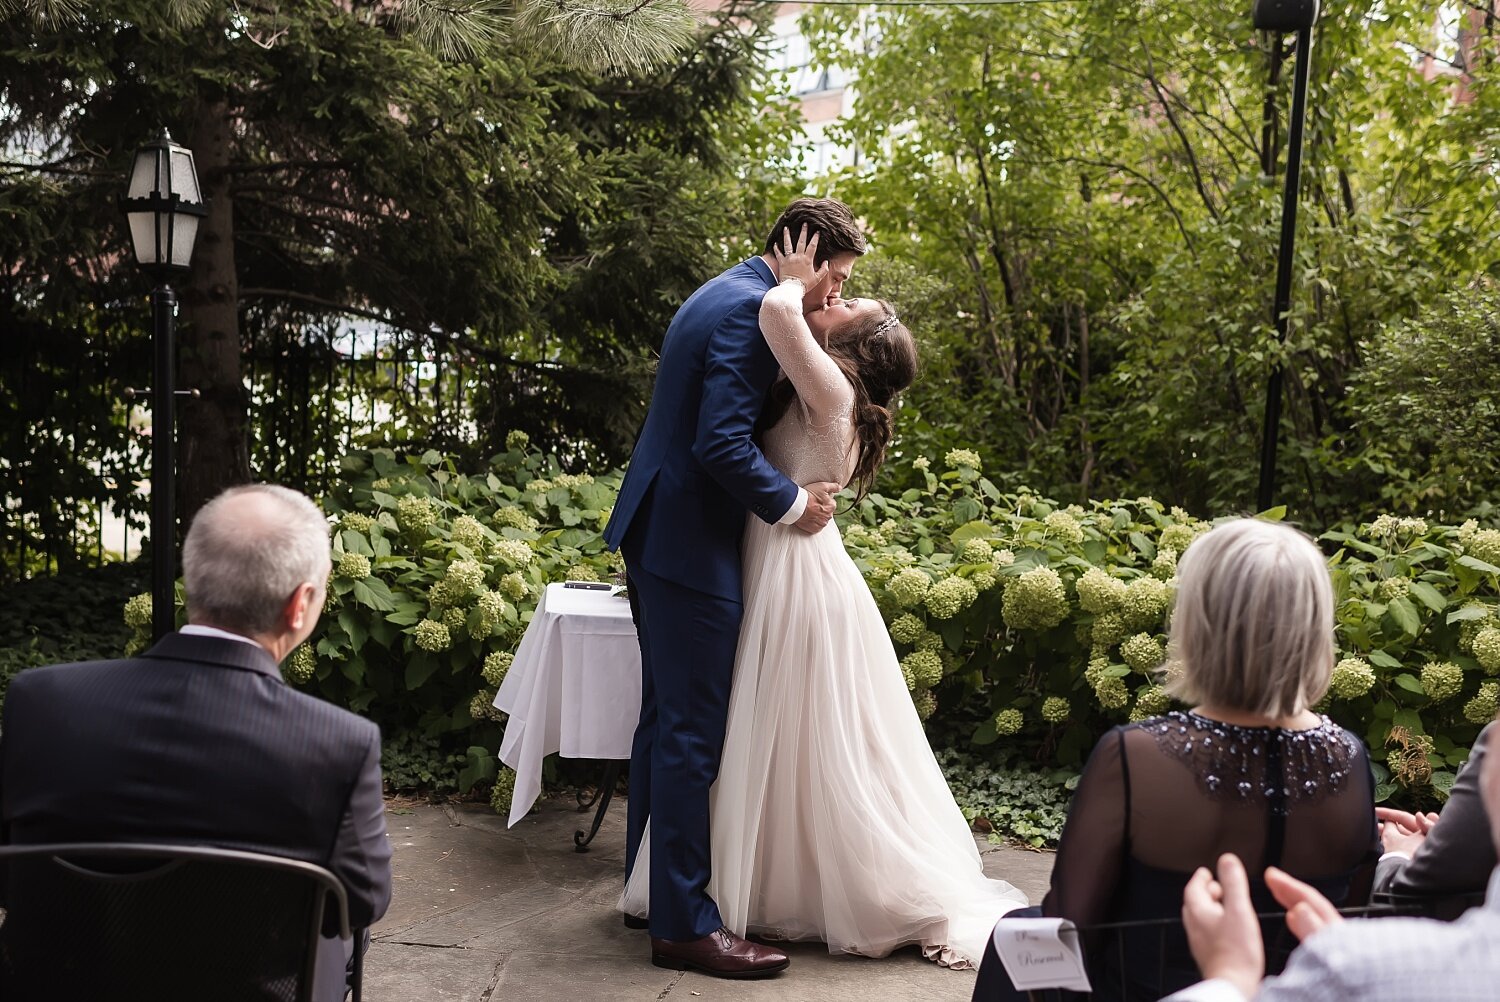  A couple share a passionate kiss during their outdoor courtyard wedding in Southeast Michigan.  